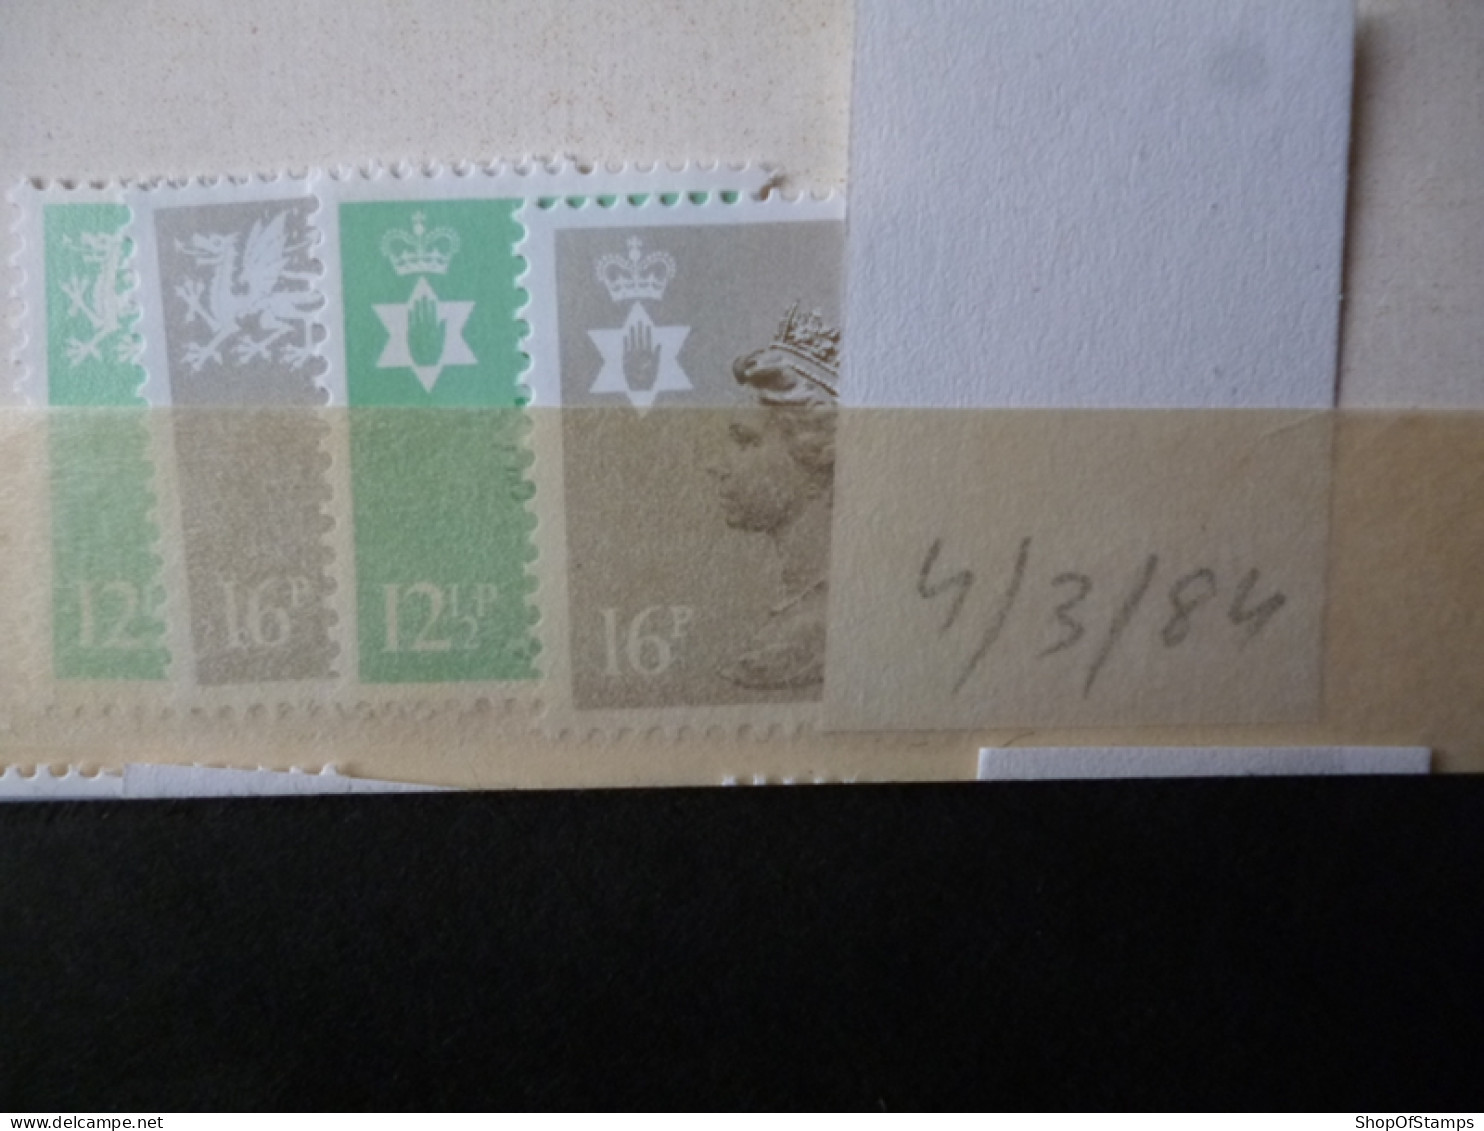 GREAT BRITAIN SG X 1984 28.2.84  MINT DEFI ISSUE FROM GPO IN ENVELOPE - Maschinenstempel (EMA)